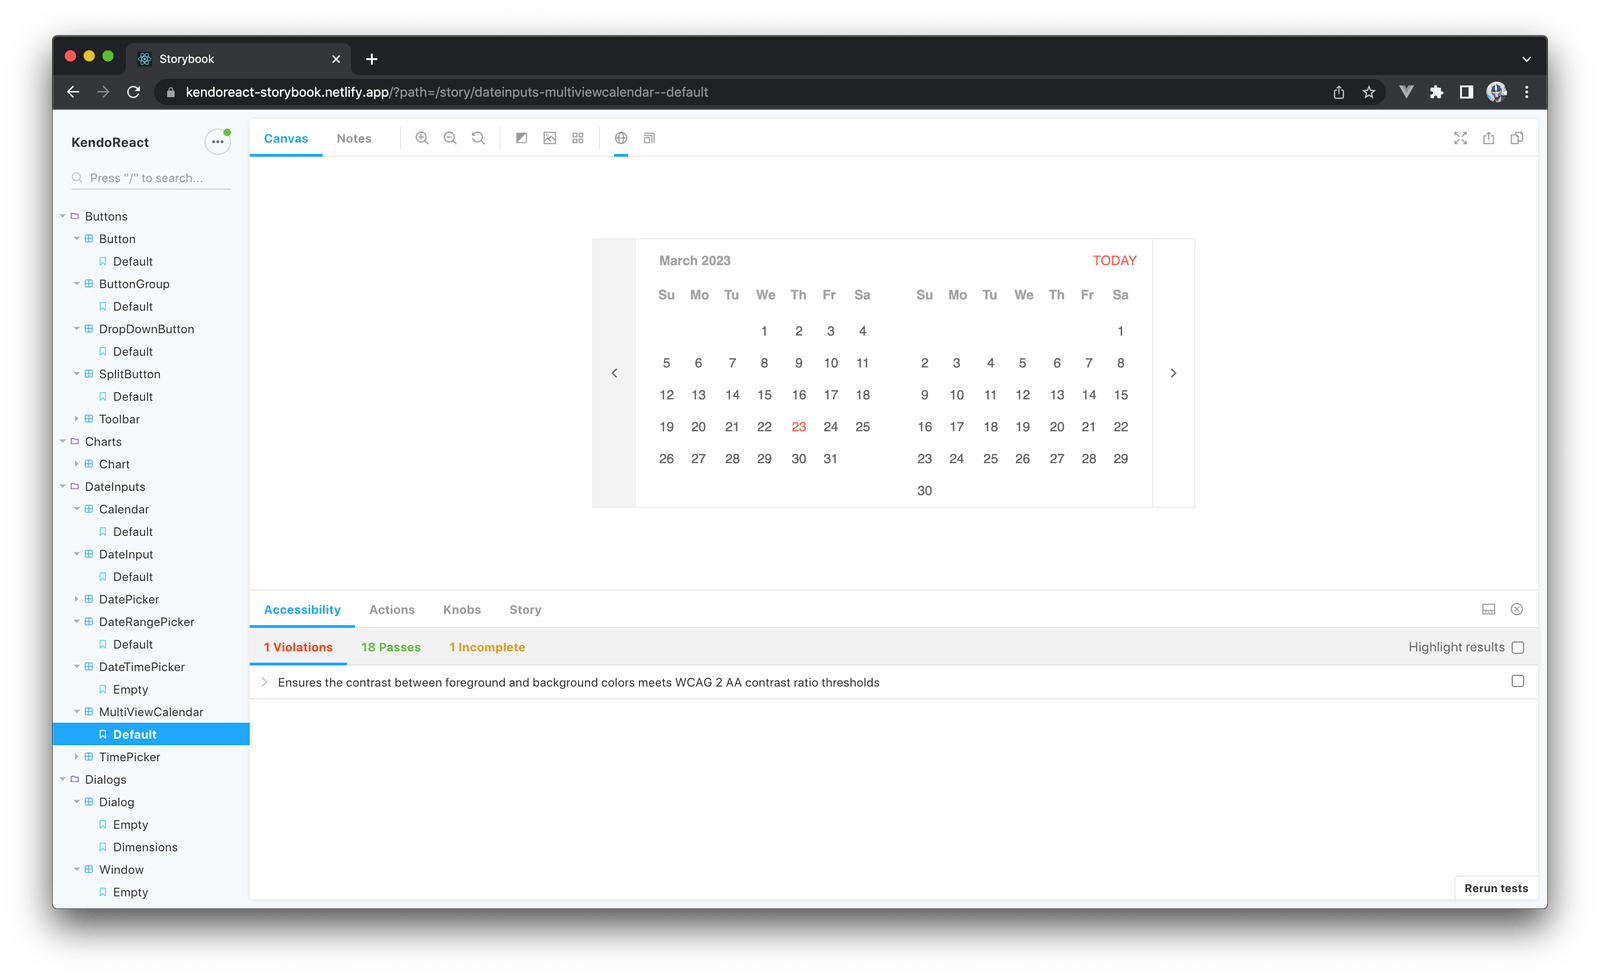 1 violation in the multiview calendar